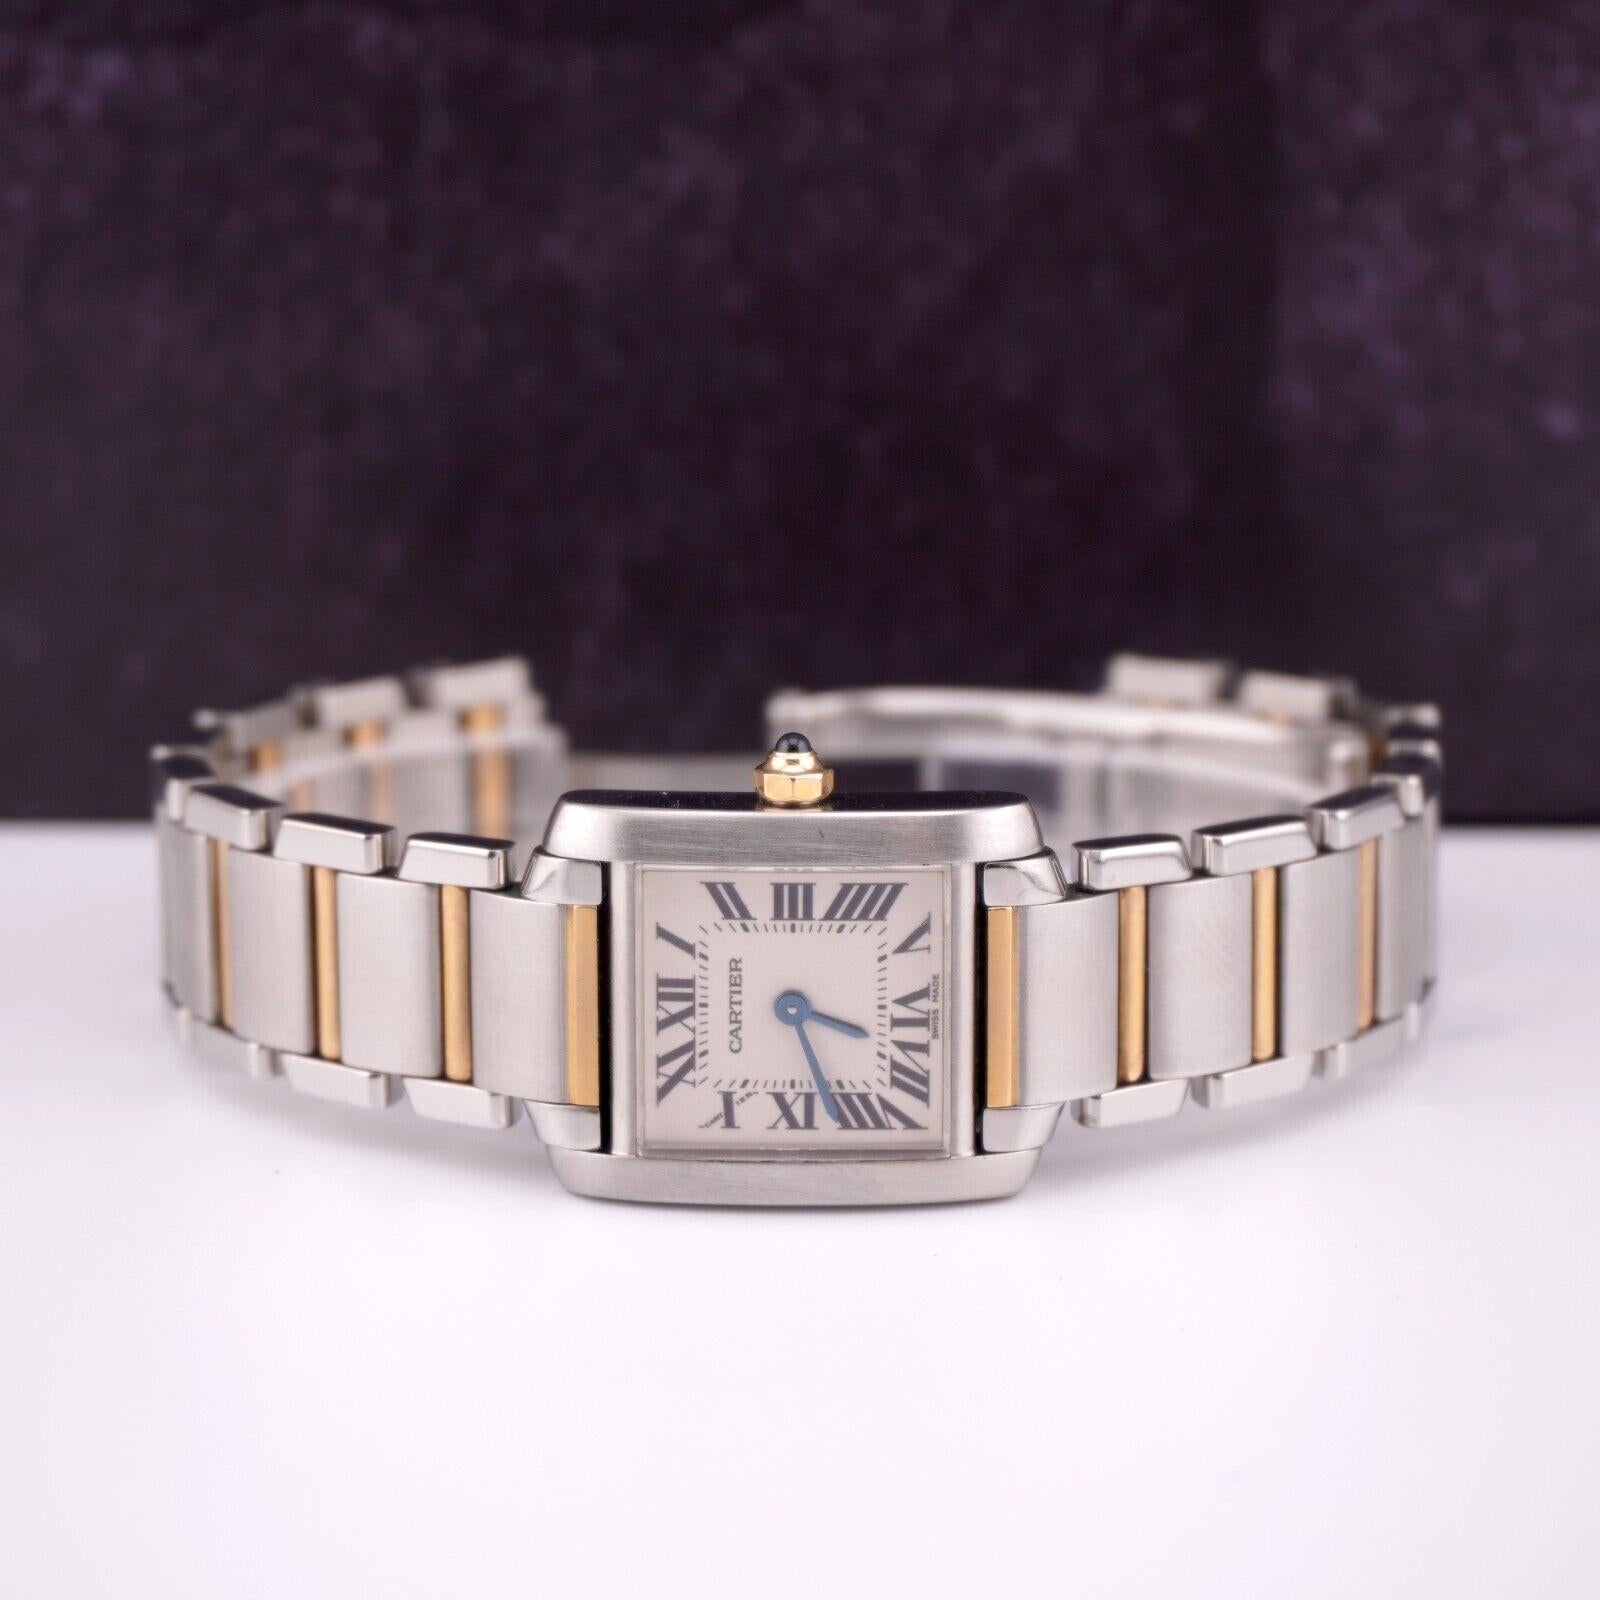 Cartier Tank Francaise 20mm Watch

Pre-owned w/ Gift Box
100% Authentic Authenticity Card
Condition - (Great Condition) - See Pics
Watch Reference - 2384
Model - Tank Francaise
Dial Color - White
Material - 18k Yellow Gold/Stainless Steel
Watch Will